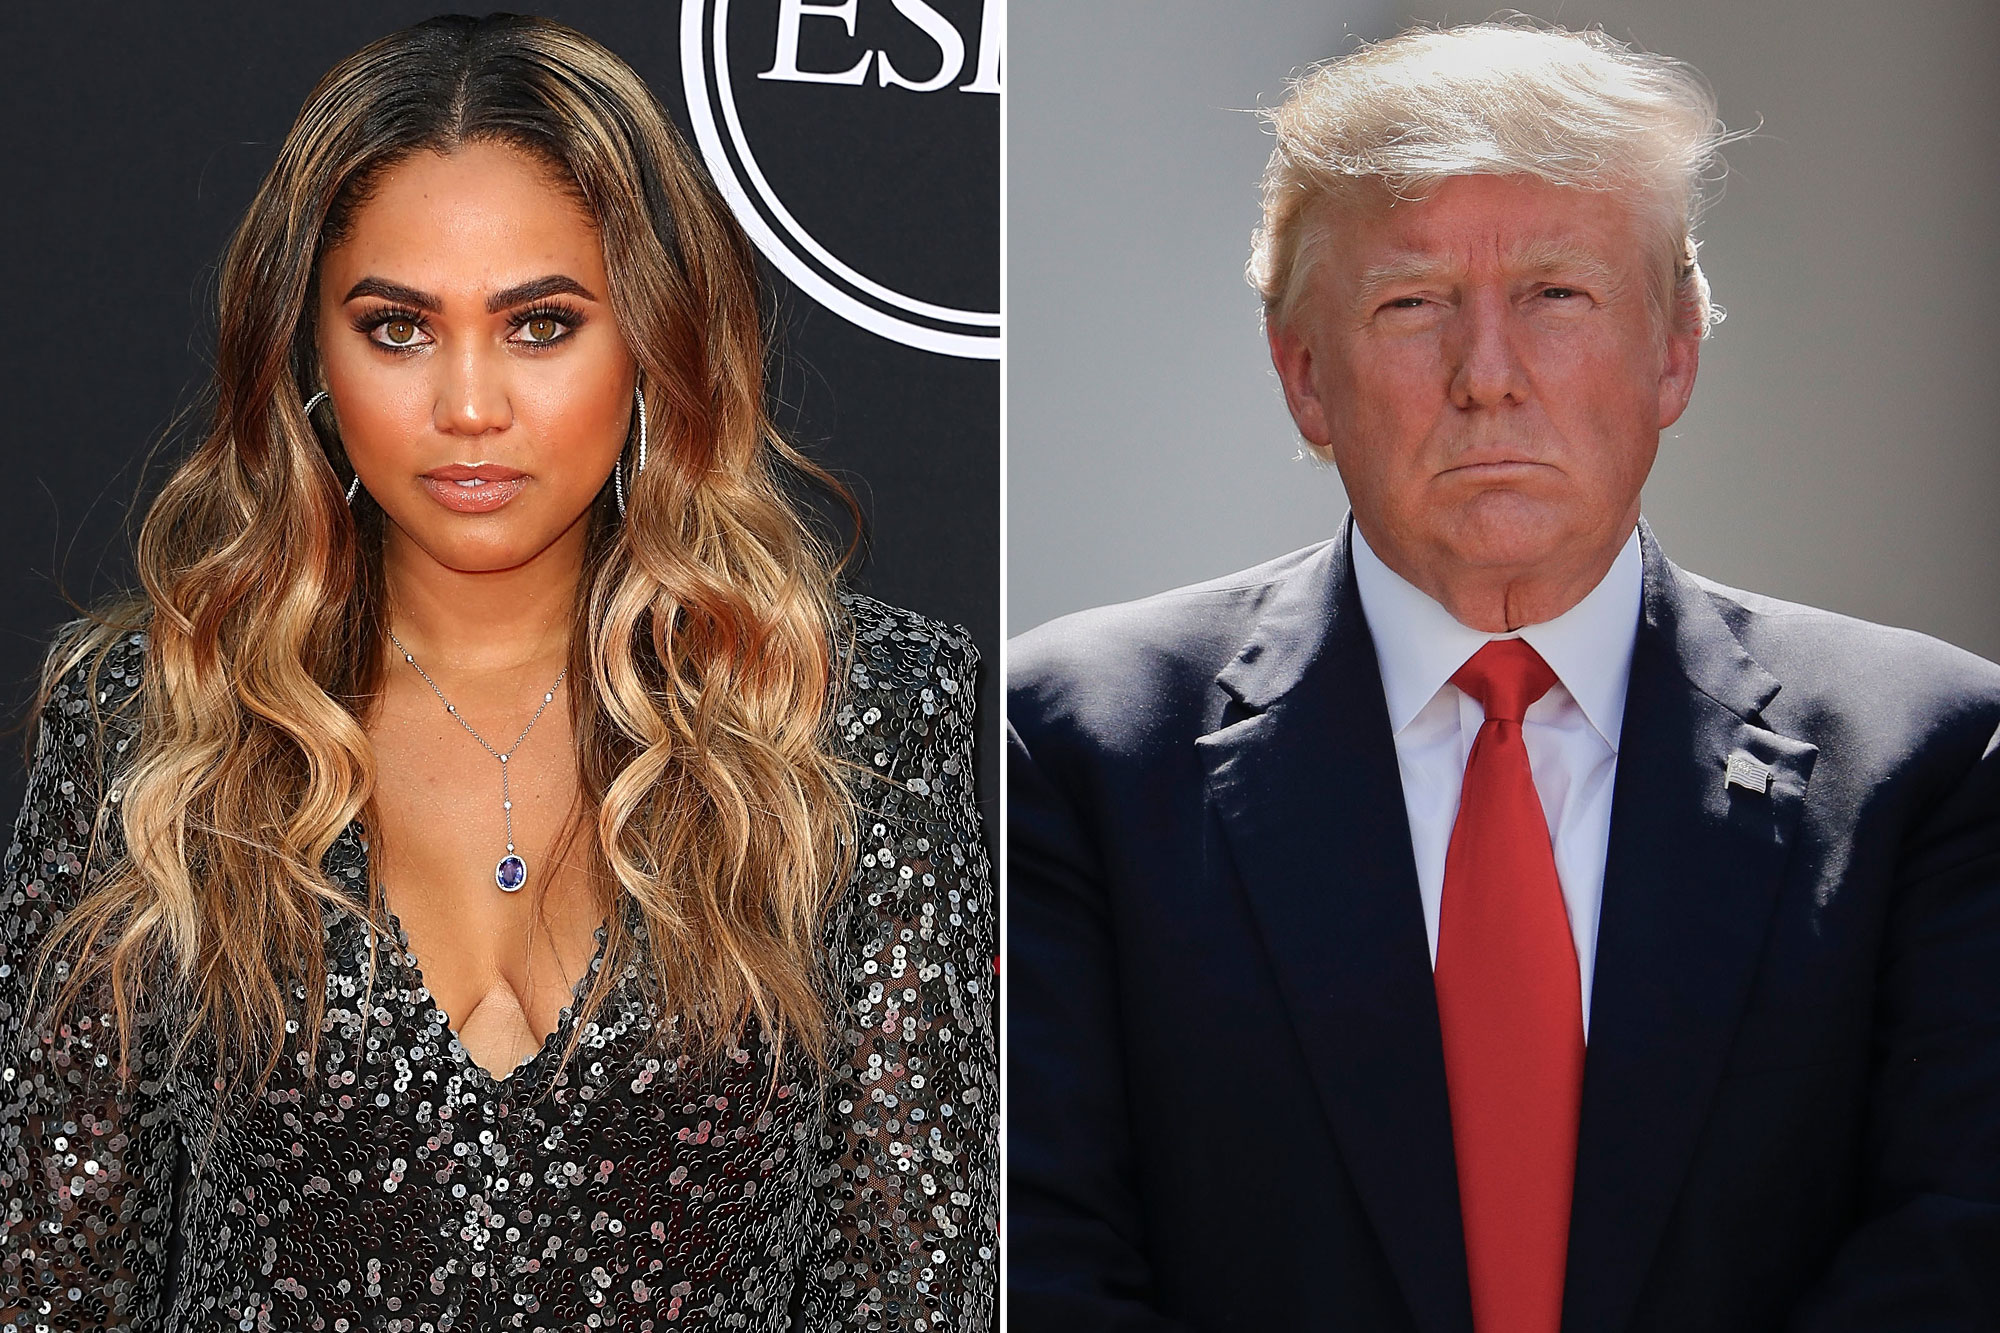 Ayesha Curry and Donald Trump